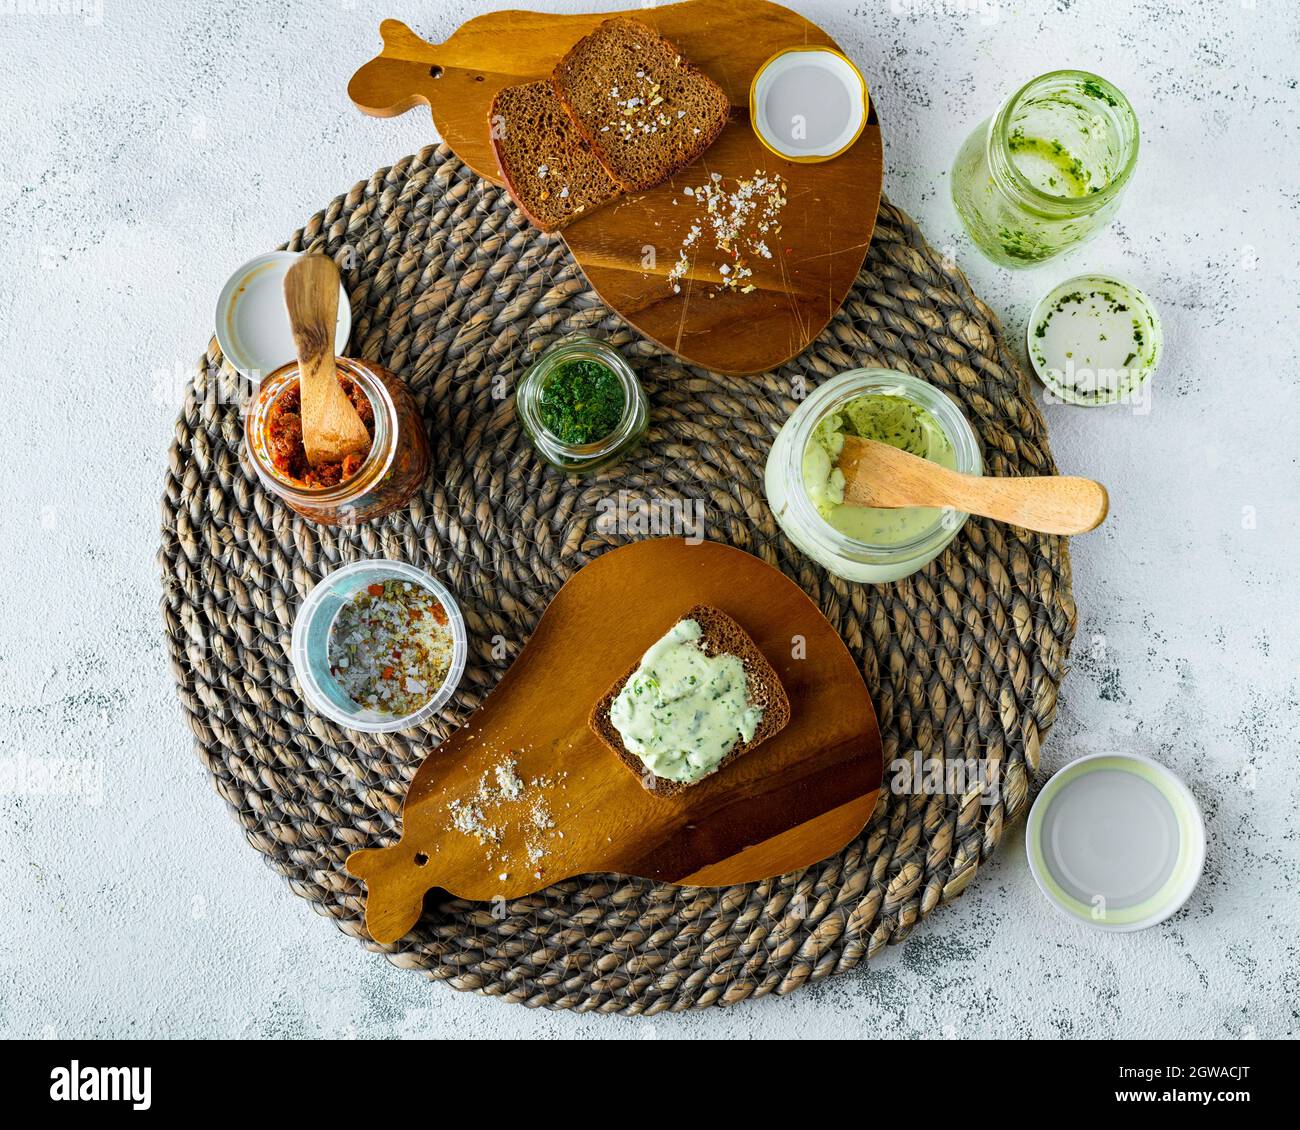 Assorted Plant Based Dips And Spreads On Rattan Placemat And Wooden Boards, Top View Stock Photo